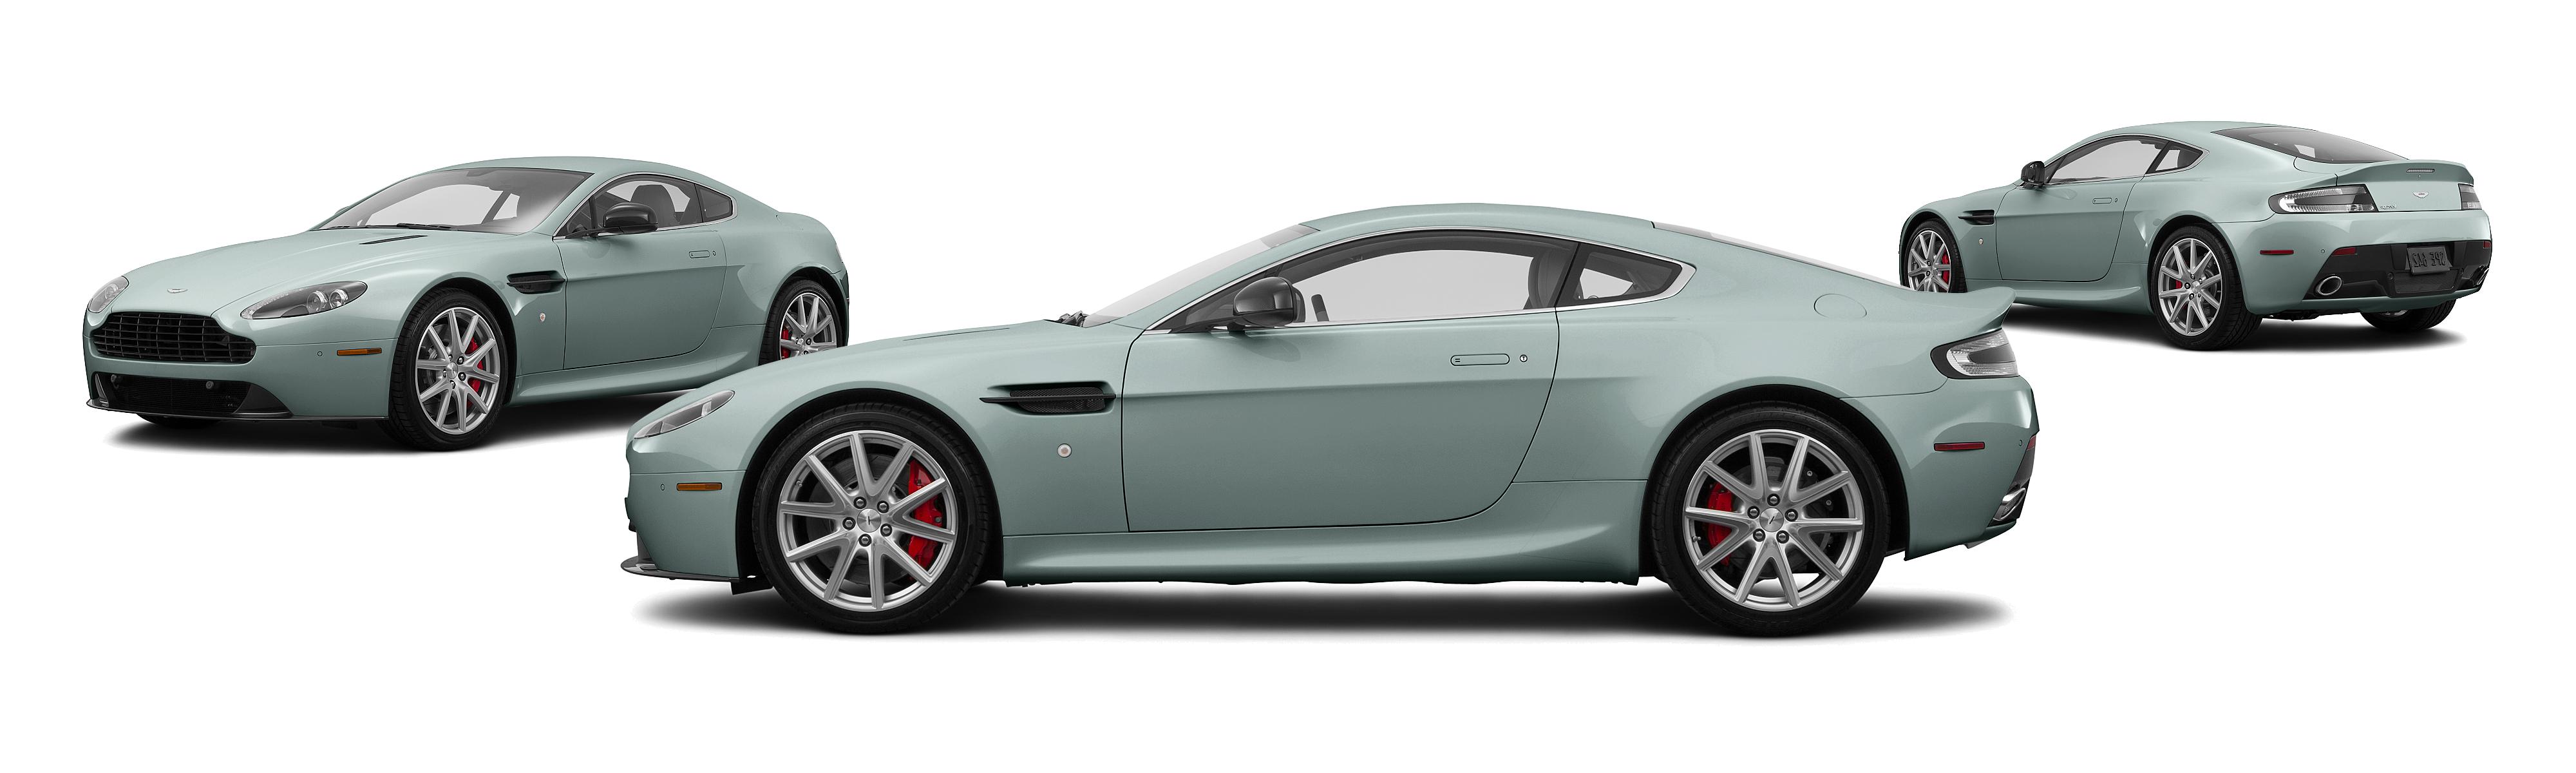 2015 Aston Martin V8 Vantage S 2dr Coupe - Research - GrooveCar